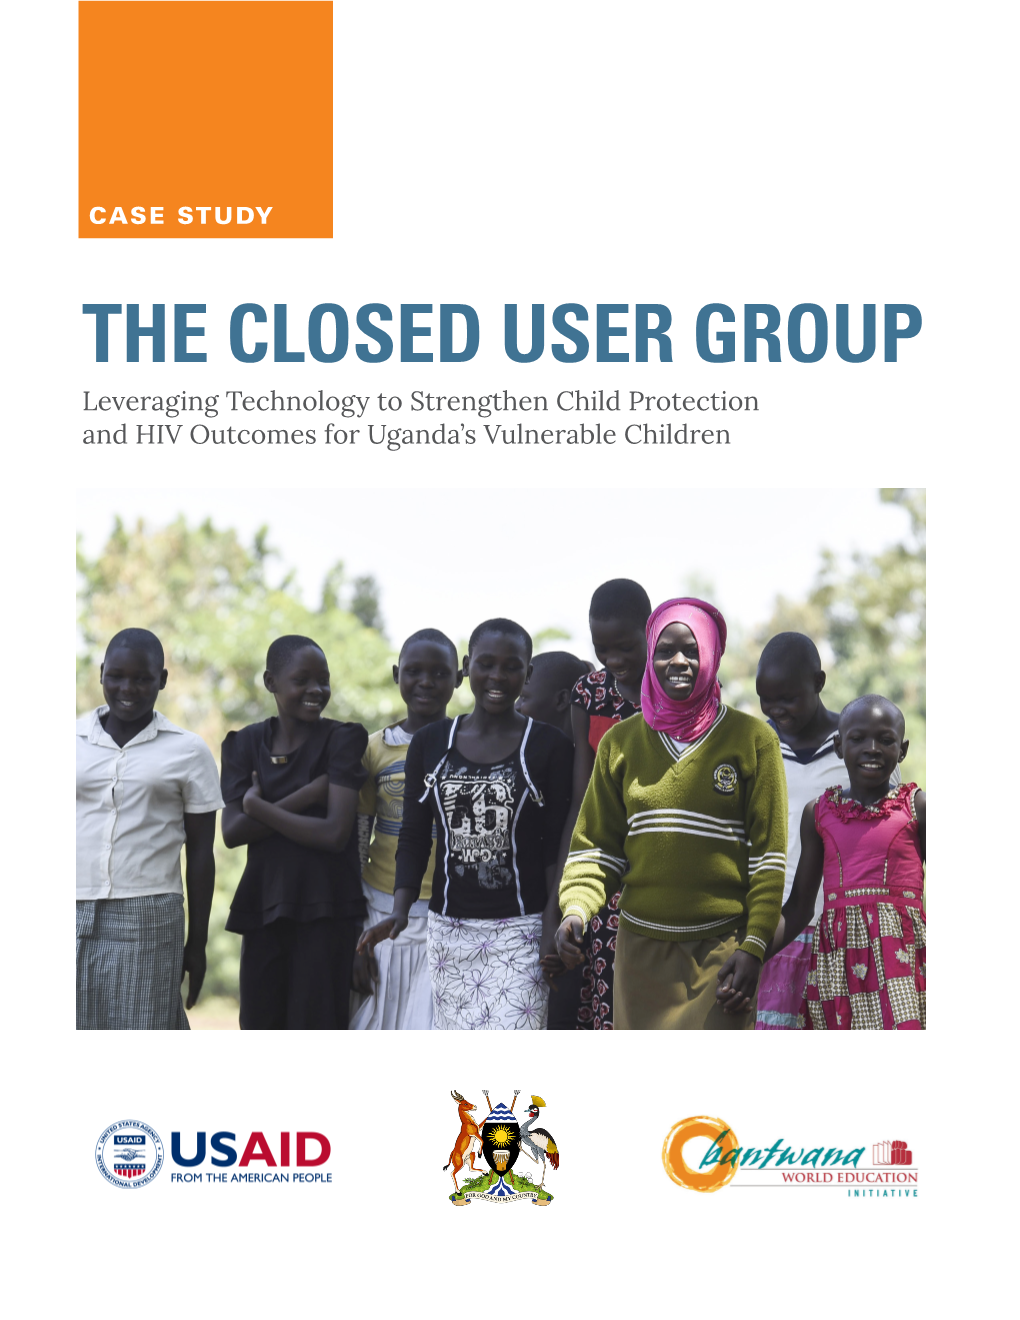 THE CLOSED USER GROUP Leveraging Technology to Strengthen Child Protection and HIV Outcomes for Uganda’S Vulnerable Children the CLOSED USER GROUP (CUG) CASE STUDY